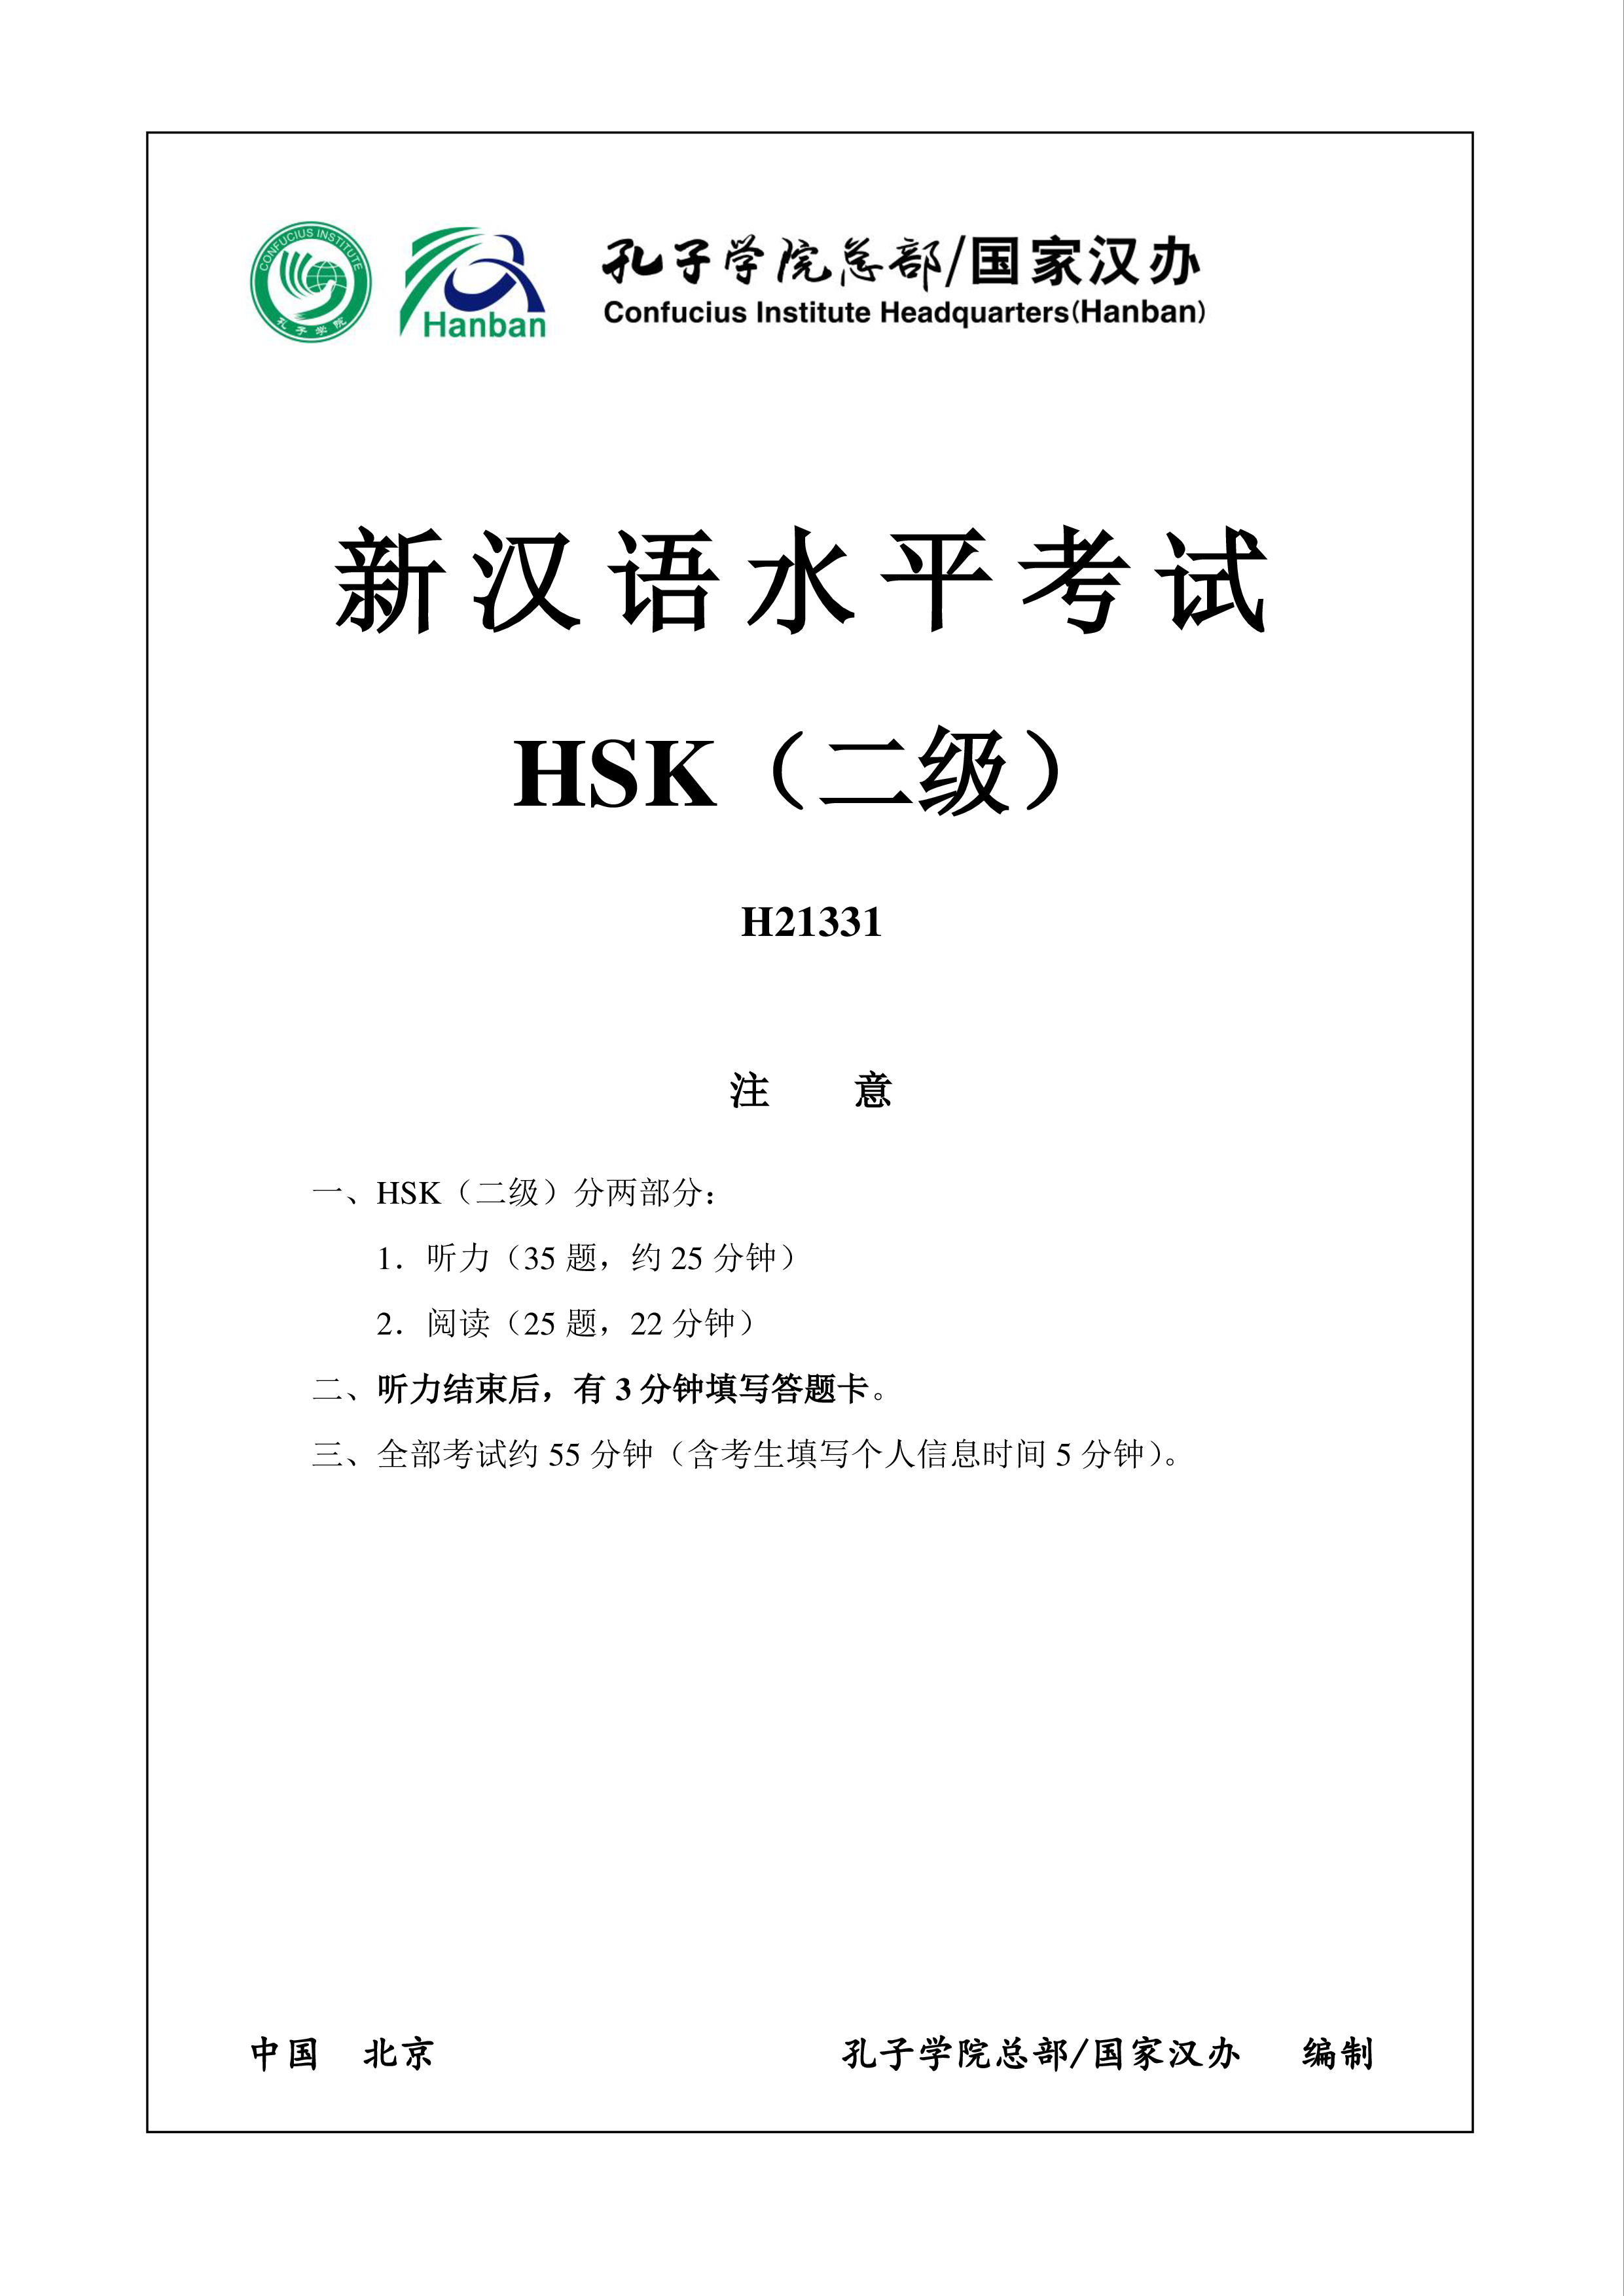 hsk2 chinese exam including answers # hsk2 h21331 plantilla imagen principal